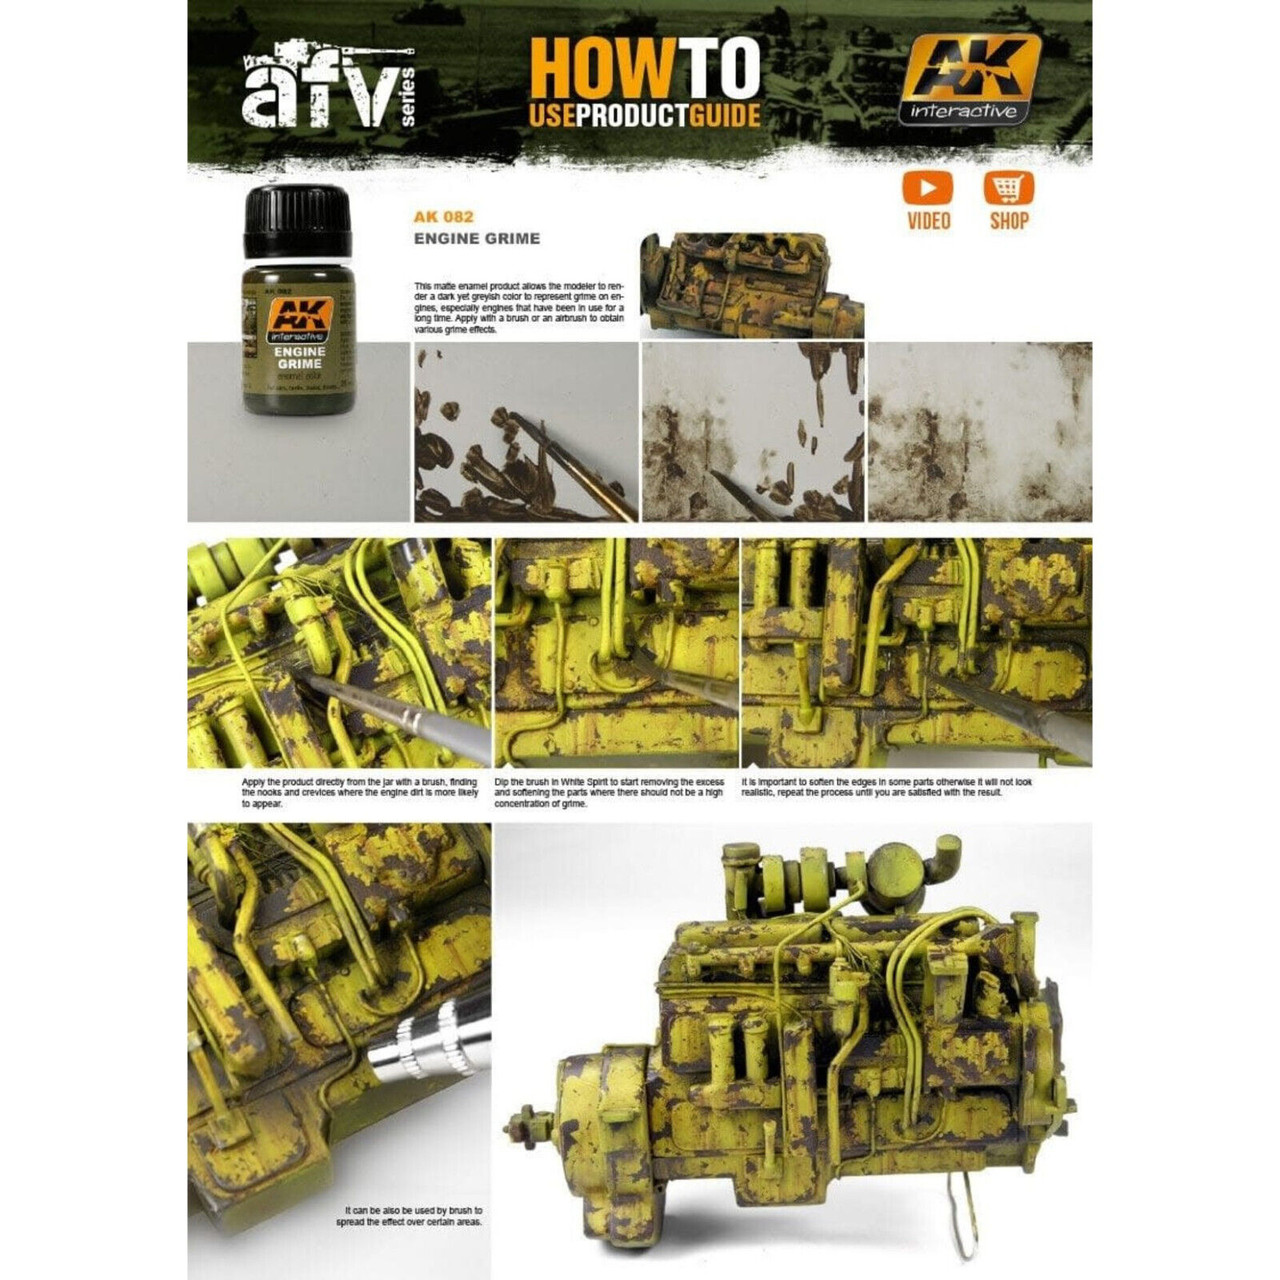  Engines and Metal Weathering Enamel Paint Set by AK  Interactive